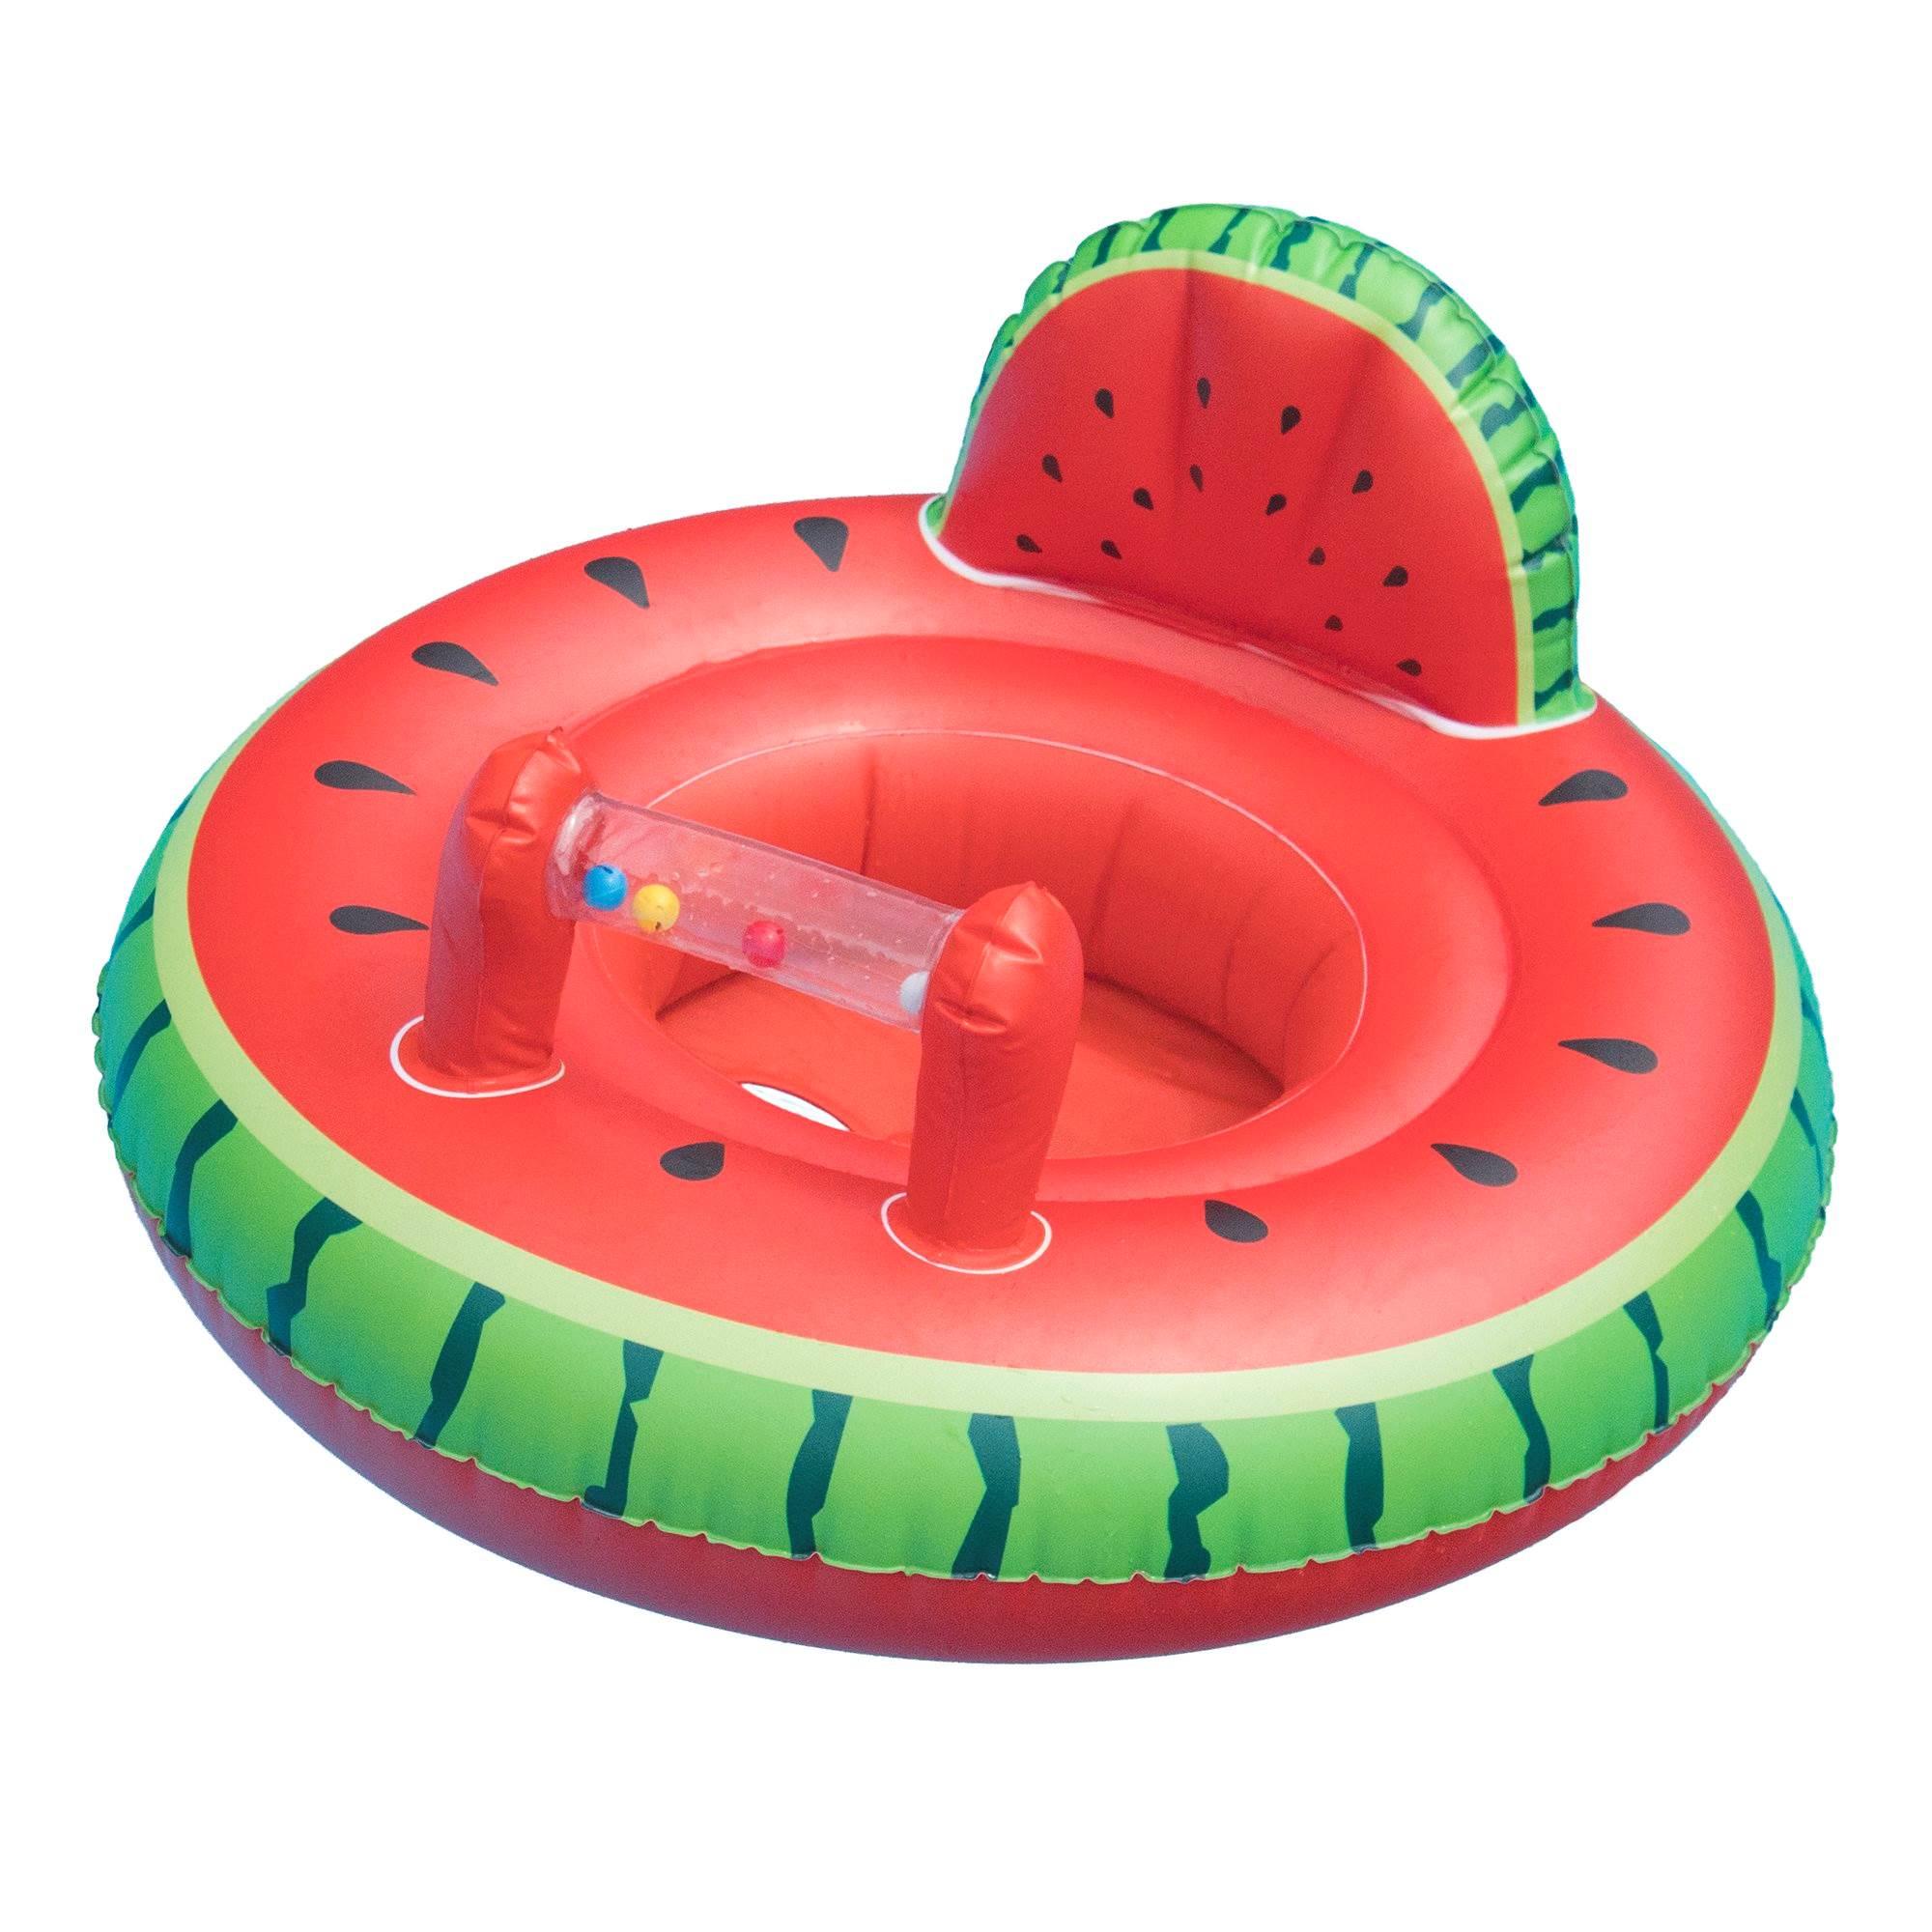 Swimline Watermelon Baby Seat Pool Inflatable Ride-On, Red, Green - image 2 of 5